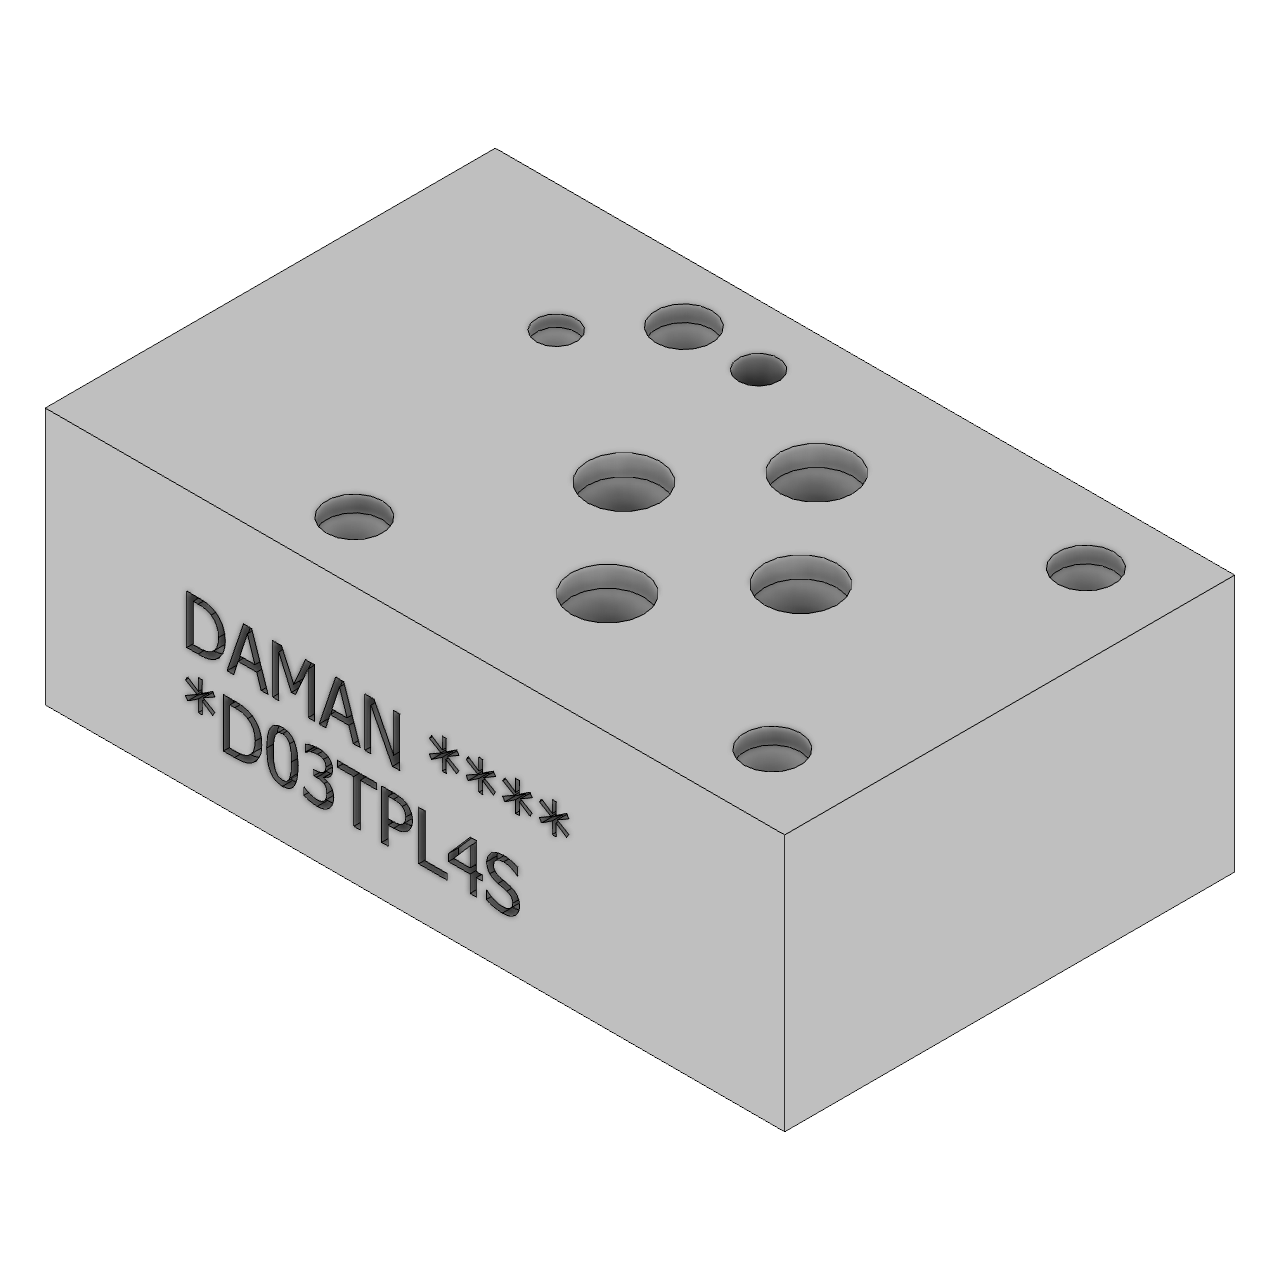 DD03TPL4S - Tapping Plates